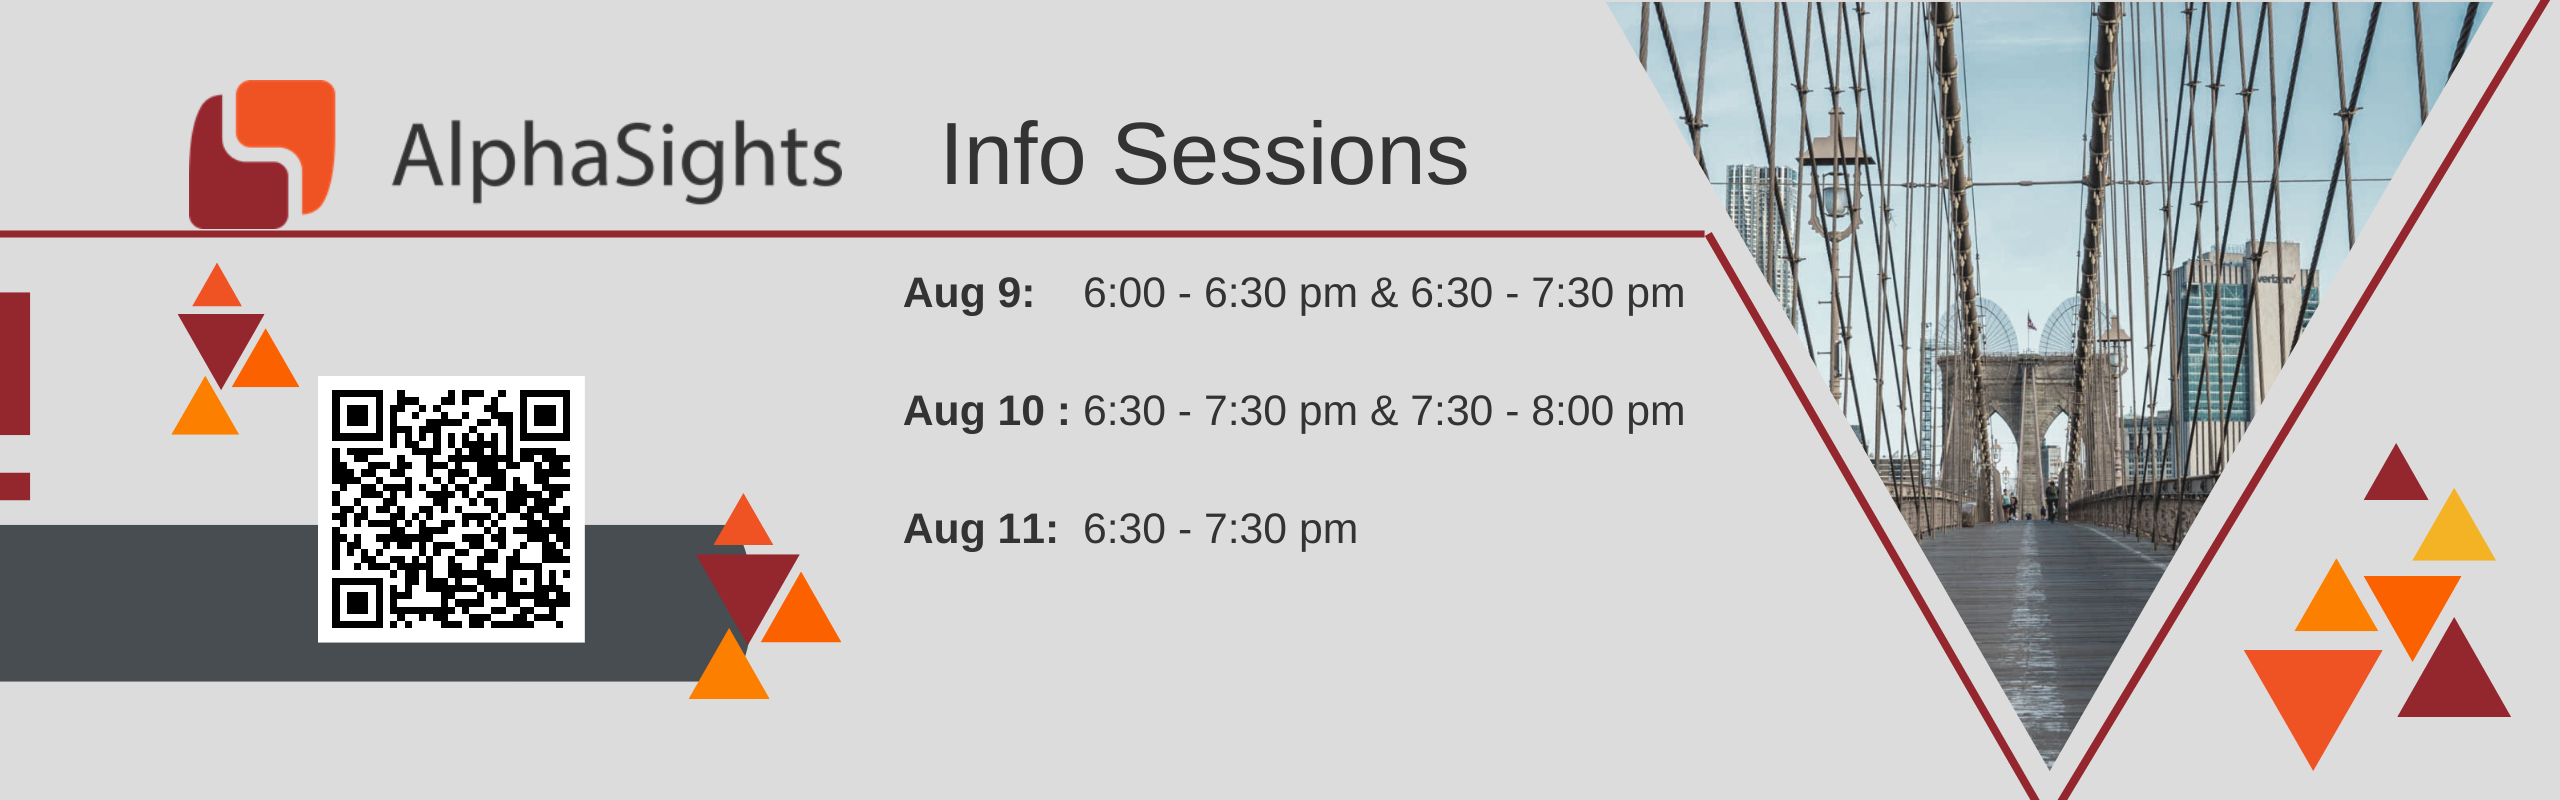 AlphaSights information sessions week of Aug 8. Review EJN for details